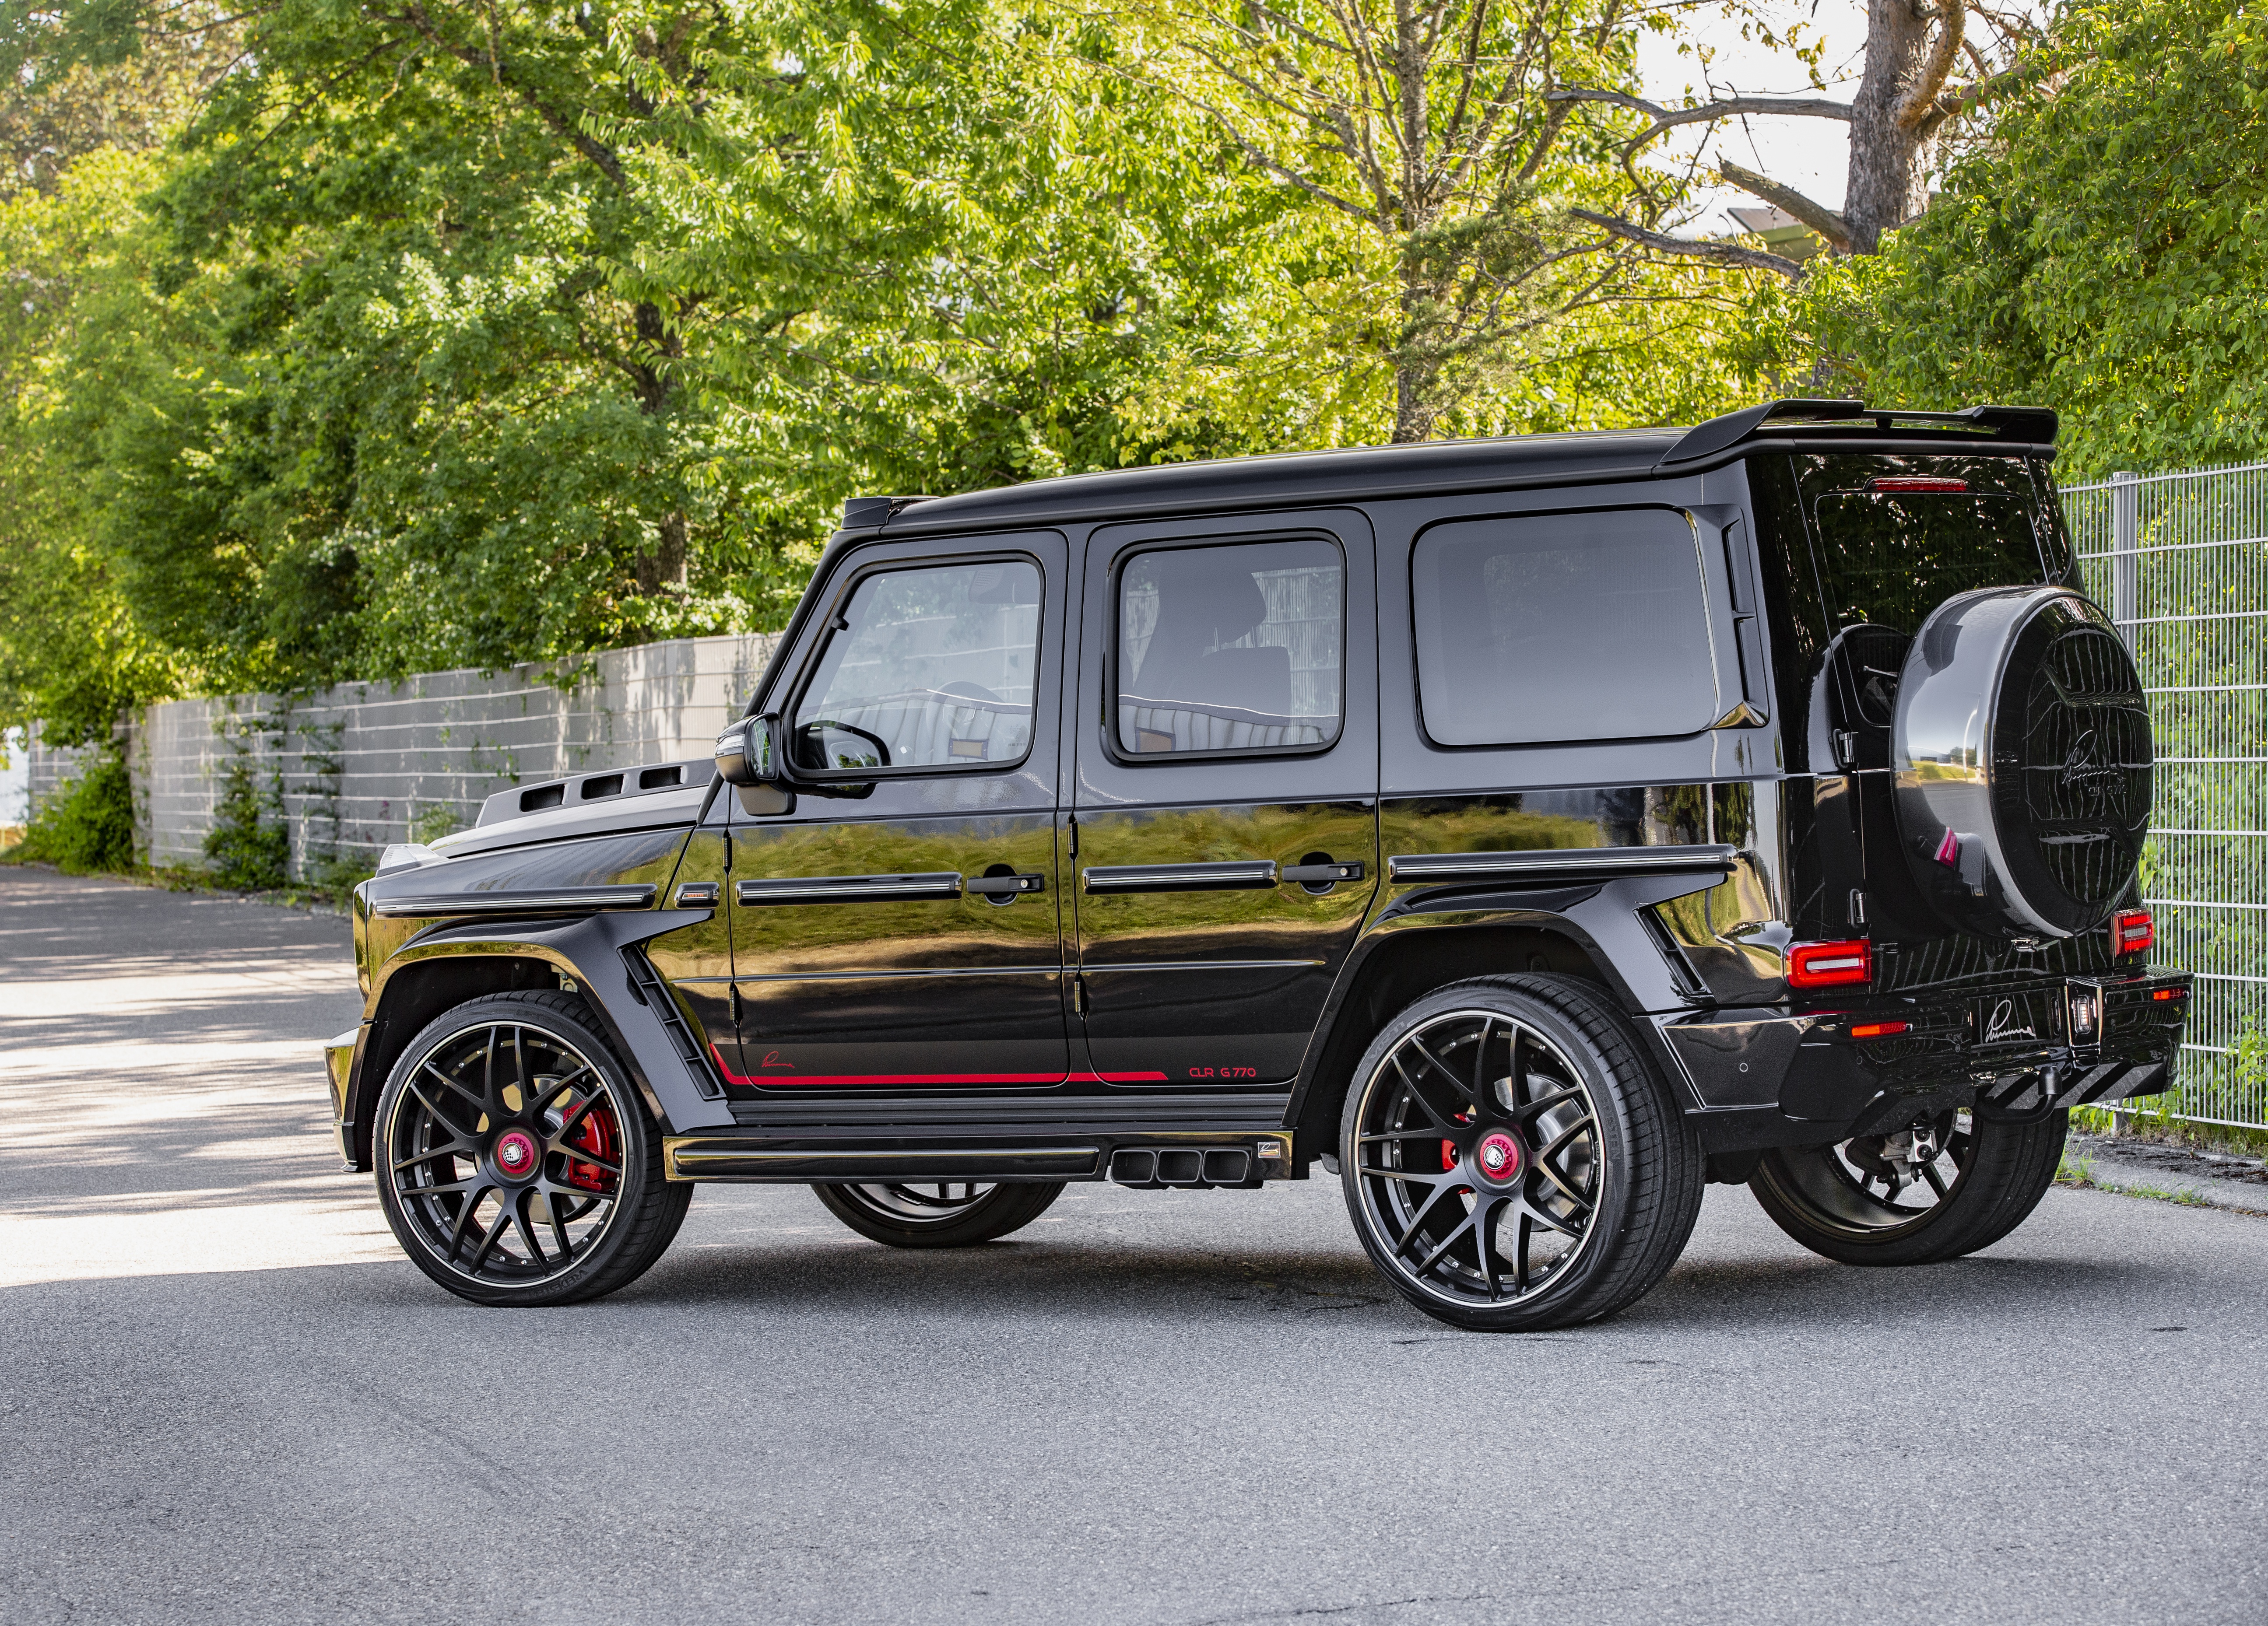 Tuning 2020. Mercedes Benz g63 AMG. Мерседес Гелендваген АМГ 63. Мерседес Бенц АМГ g63. Mercedes-Benz AMG g63 AMG.